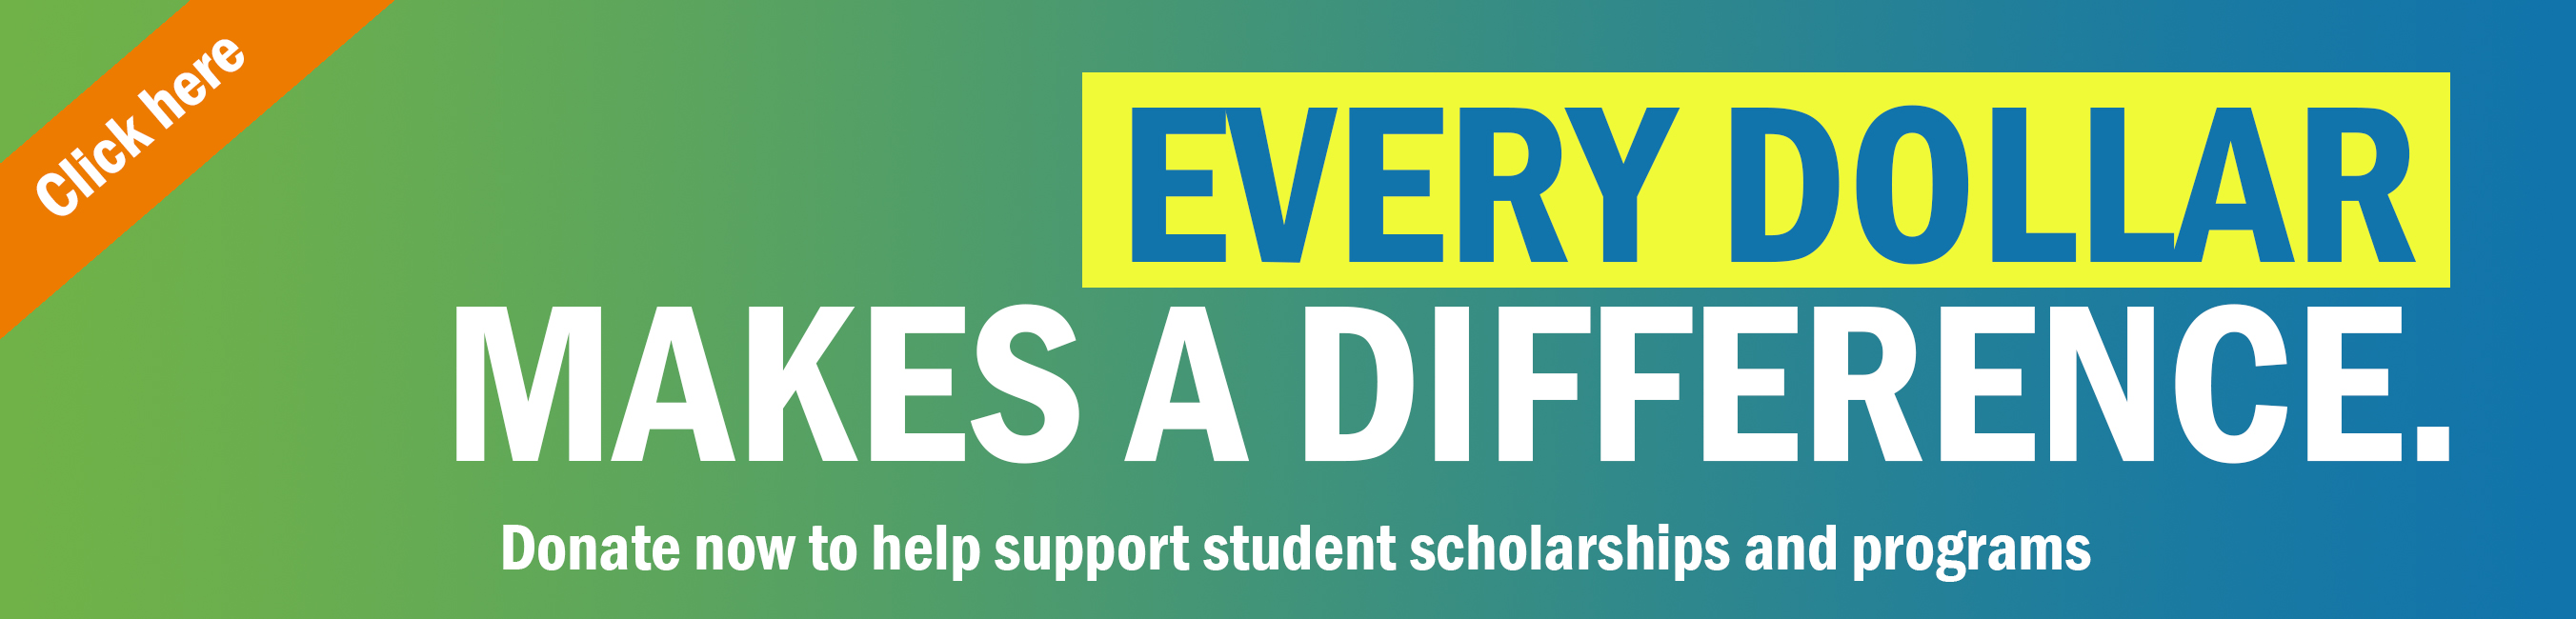 Every dollar makes a difference. Click here to donate to help support student scholarships and programs.